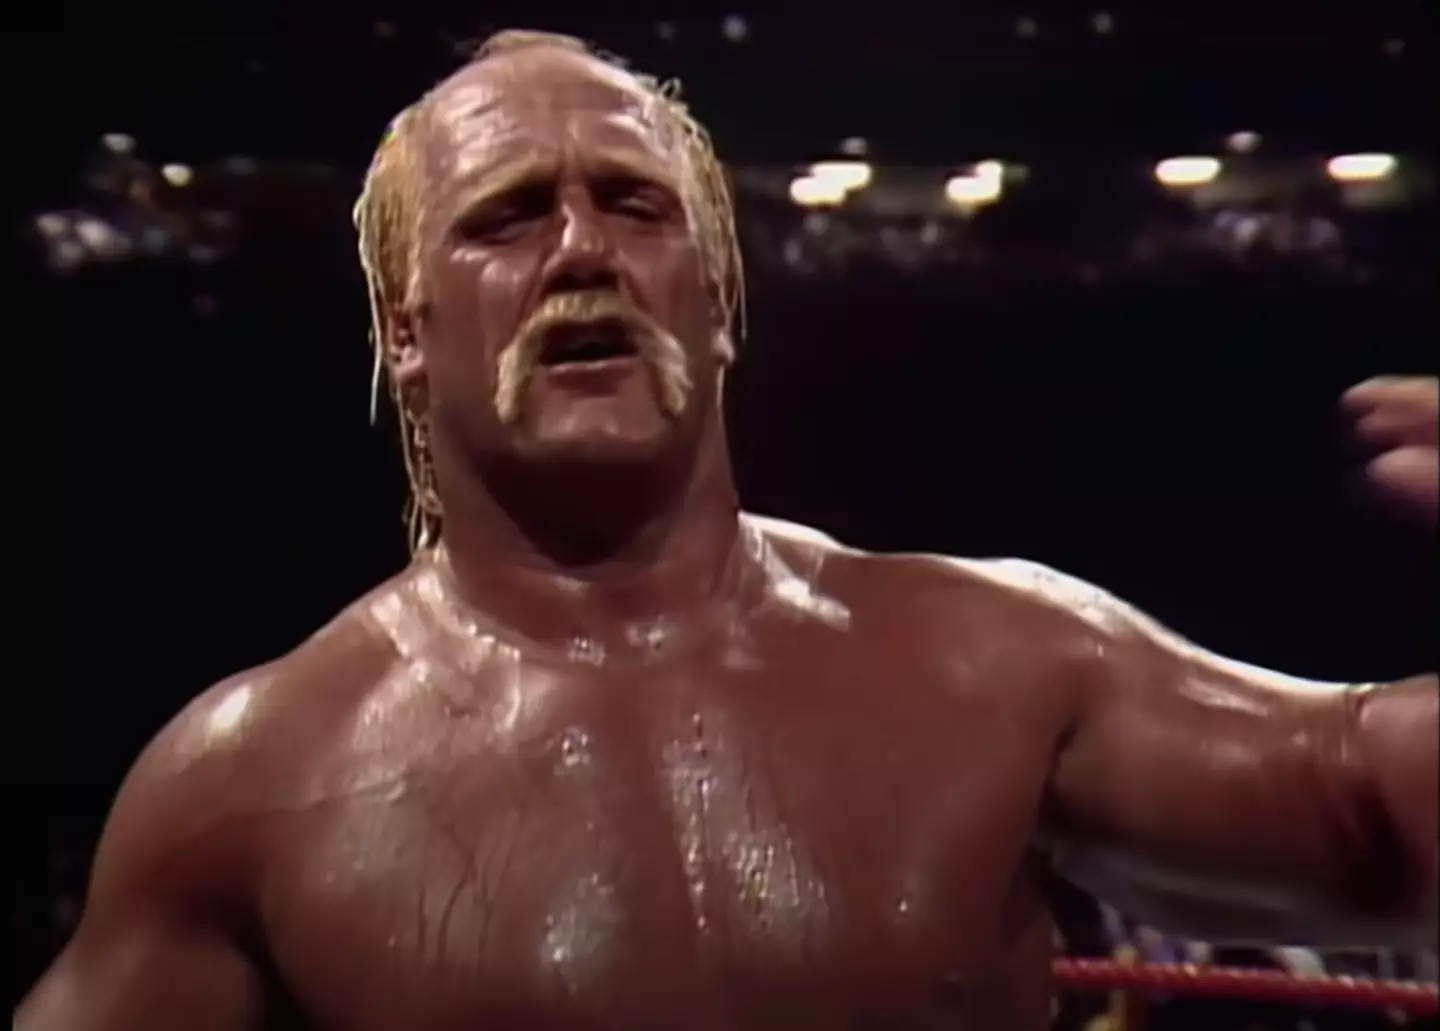 Hulk Hogan is one of the most recognisable wrestlers in the world.